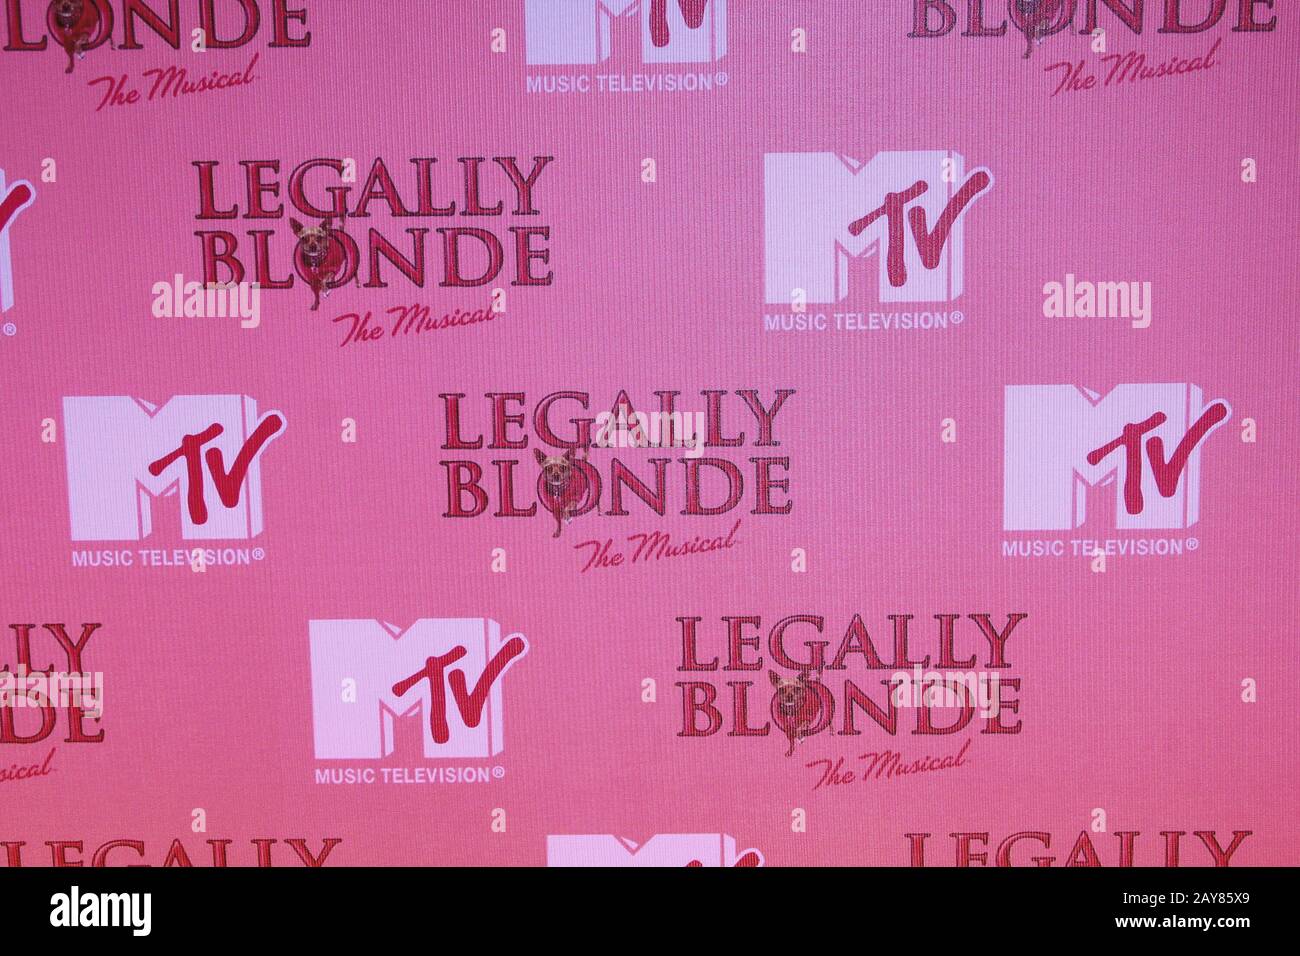 New York, NY, USA. 18 September, 2007. Atmosphere at the taping of Legally Blonde The Musical at The Palace Theatre. Credit: Steve Mack/Alamy Stock Photo